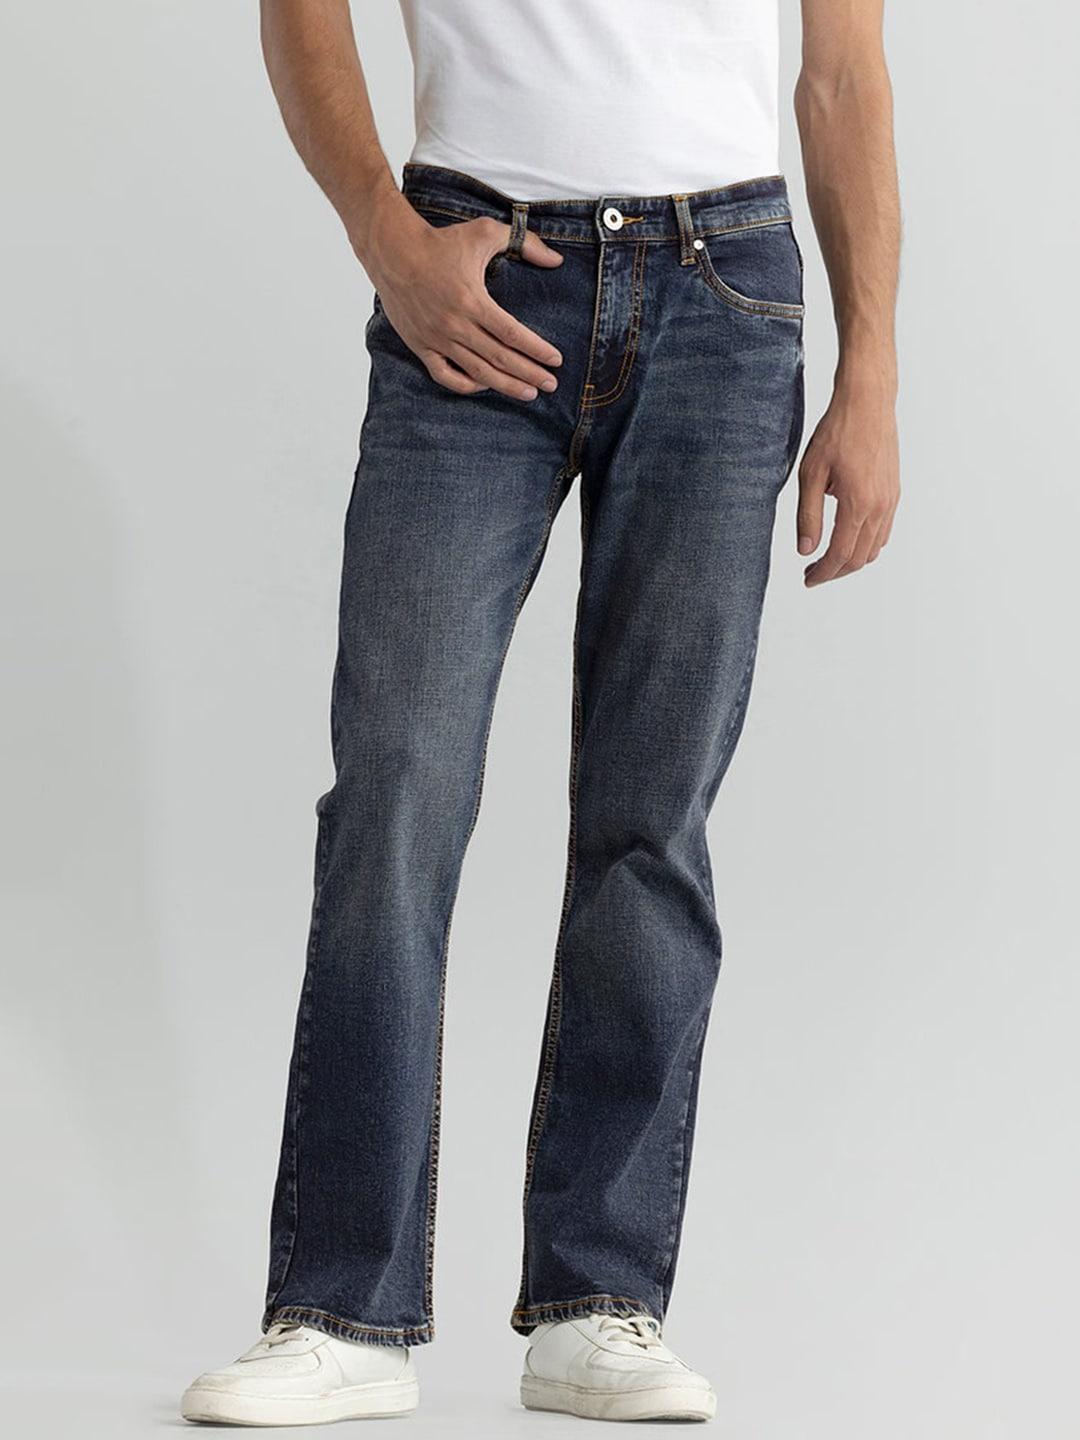 snitch-men-classic-clean-look-whiskers-and-chevrons-light-fade-stretchable-bootcut-jeans